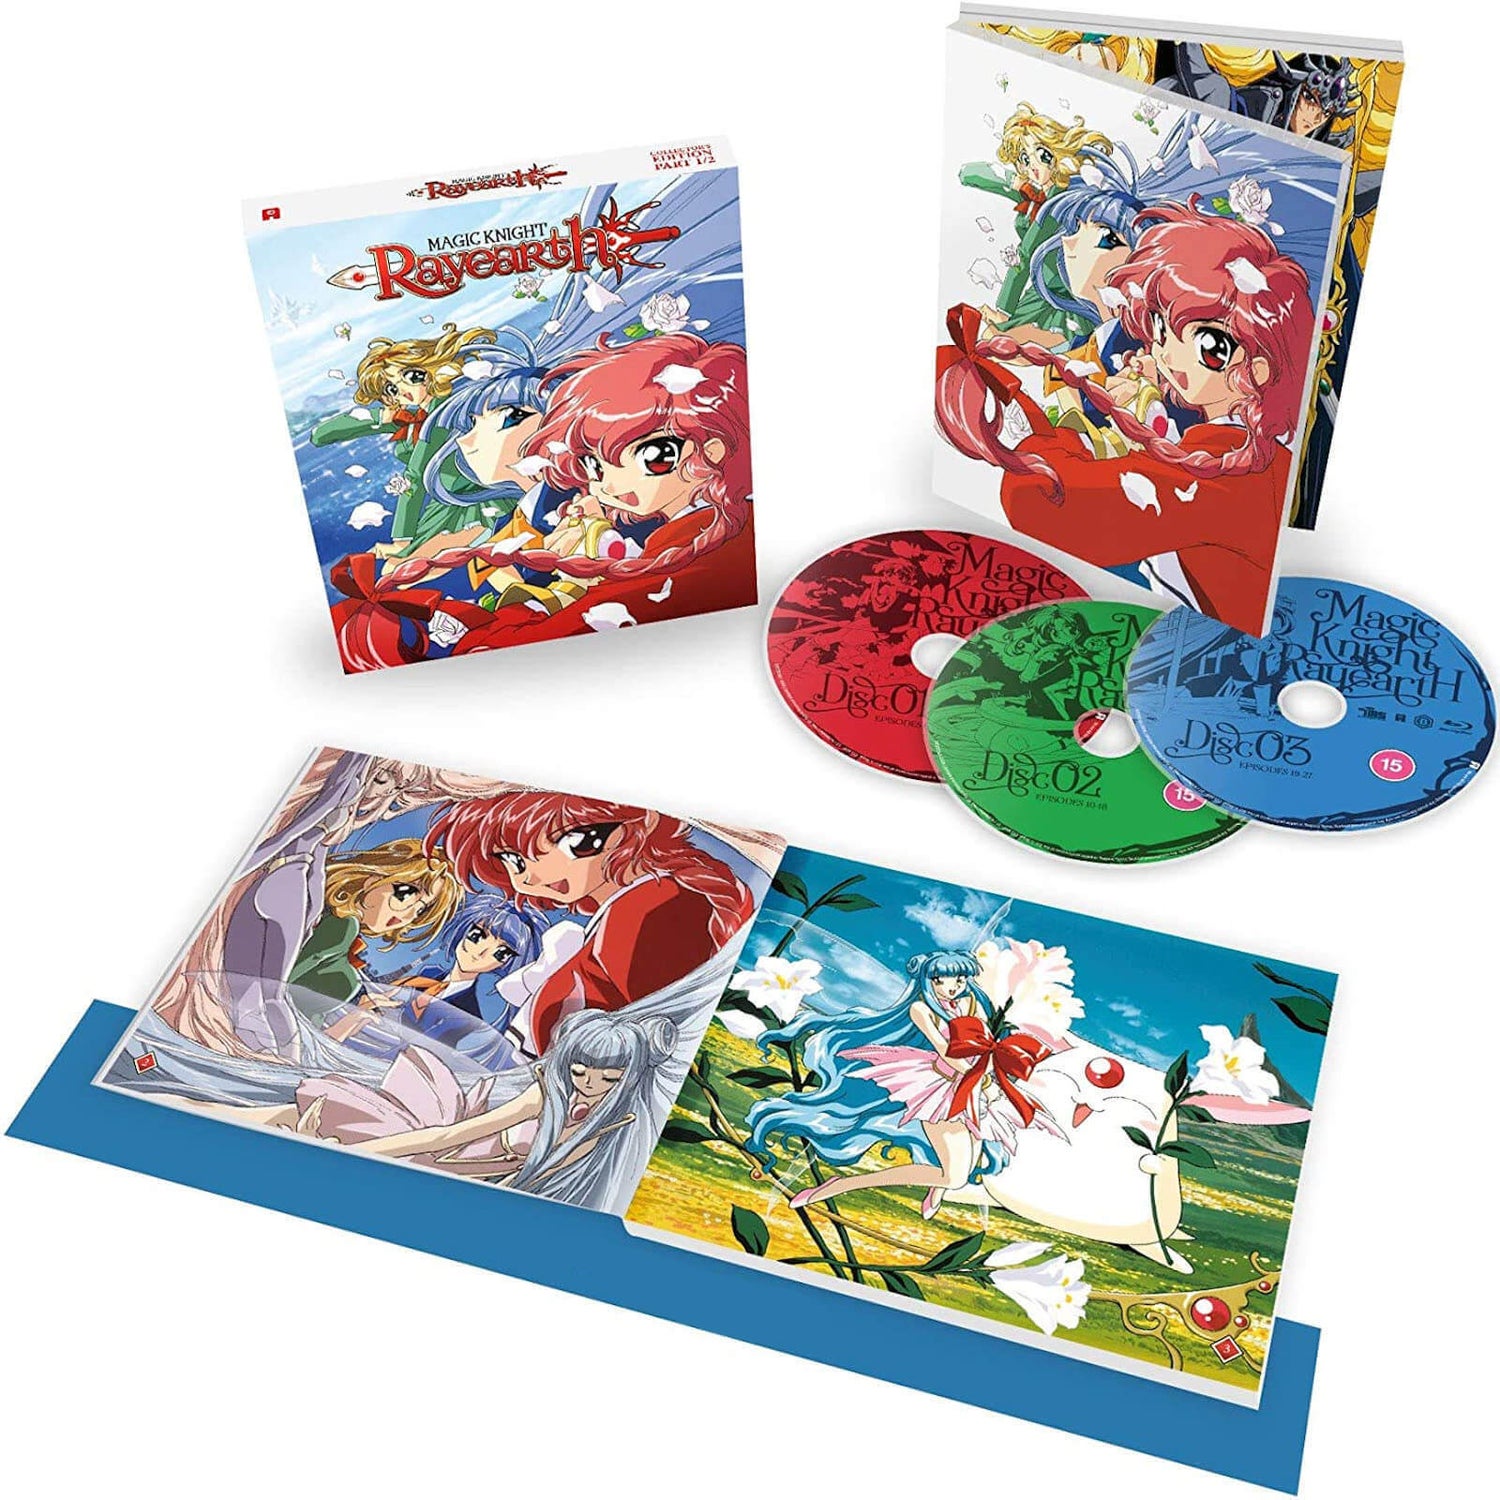 Magic Knight Rayearth Teil 1 Collector's Edition